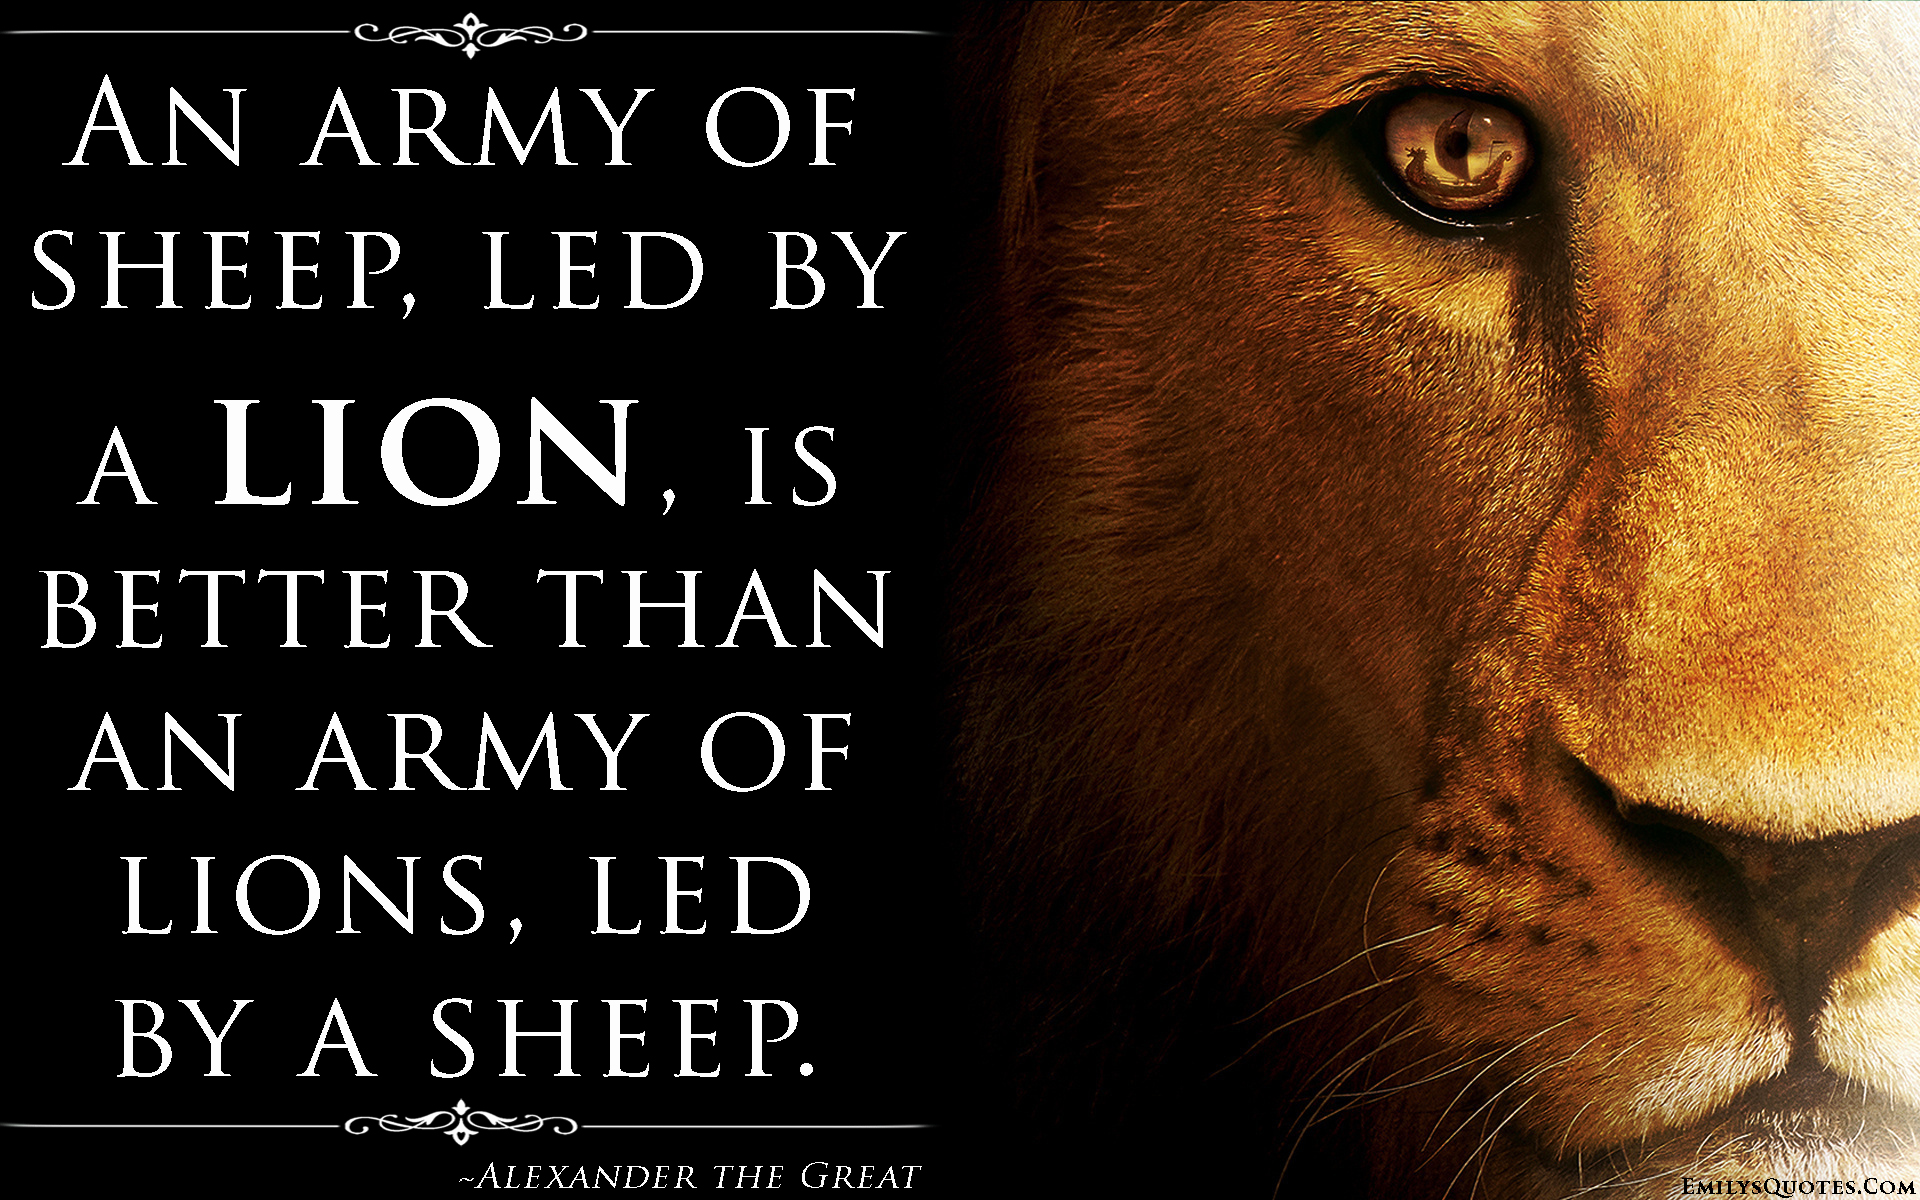 An army of sheep, led by a lion, is better than an army of lions, led by a sheep